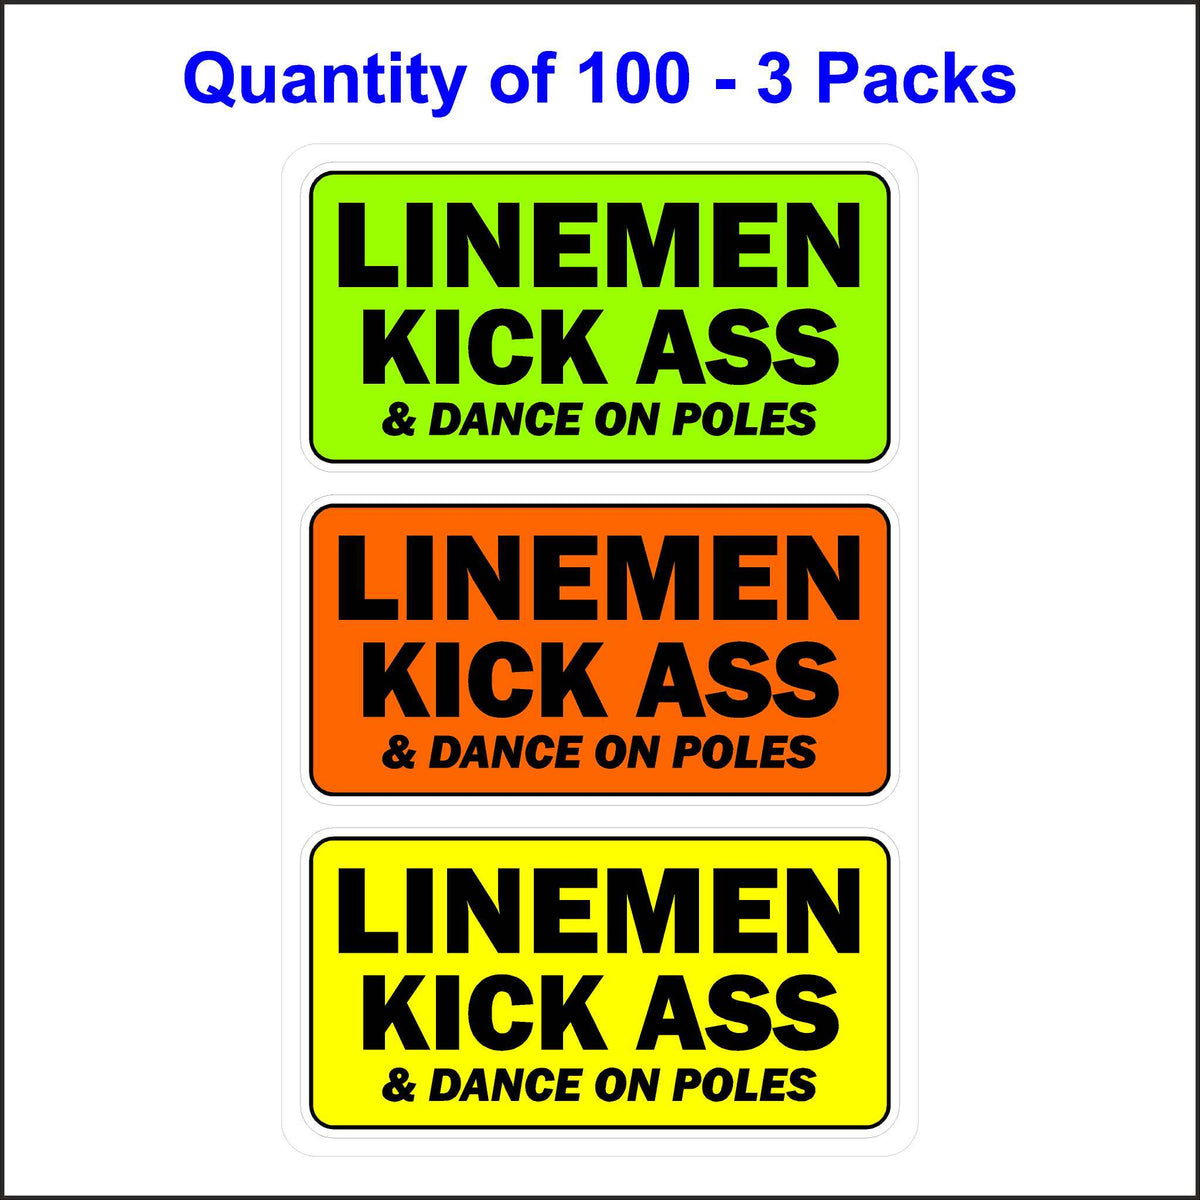 Lineman Kick Ass and Dance on Poles Sticker 3 Pack. 100 Quantity.